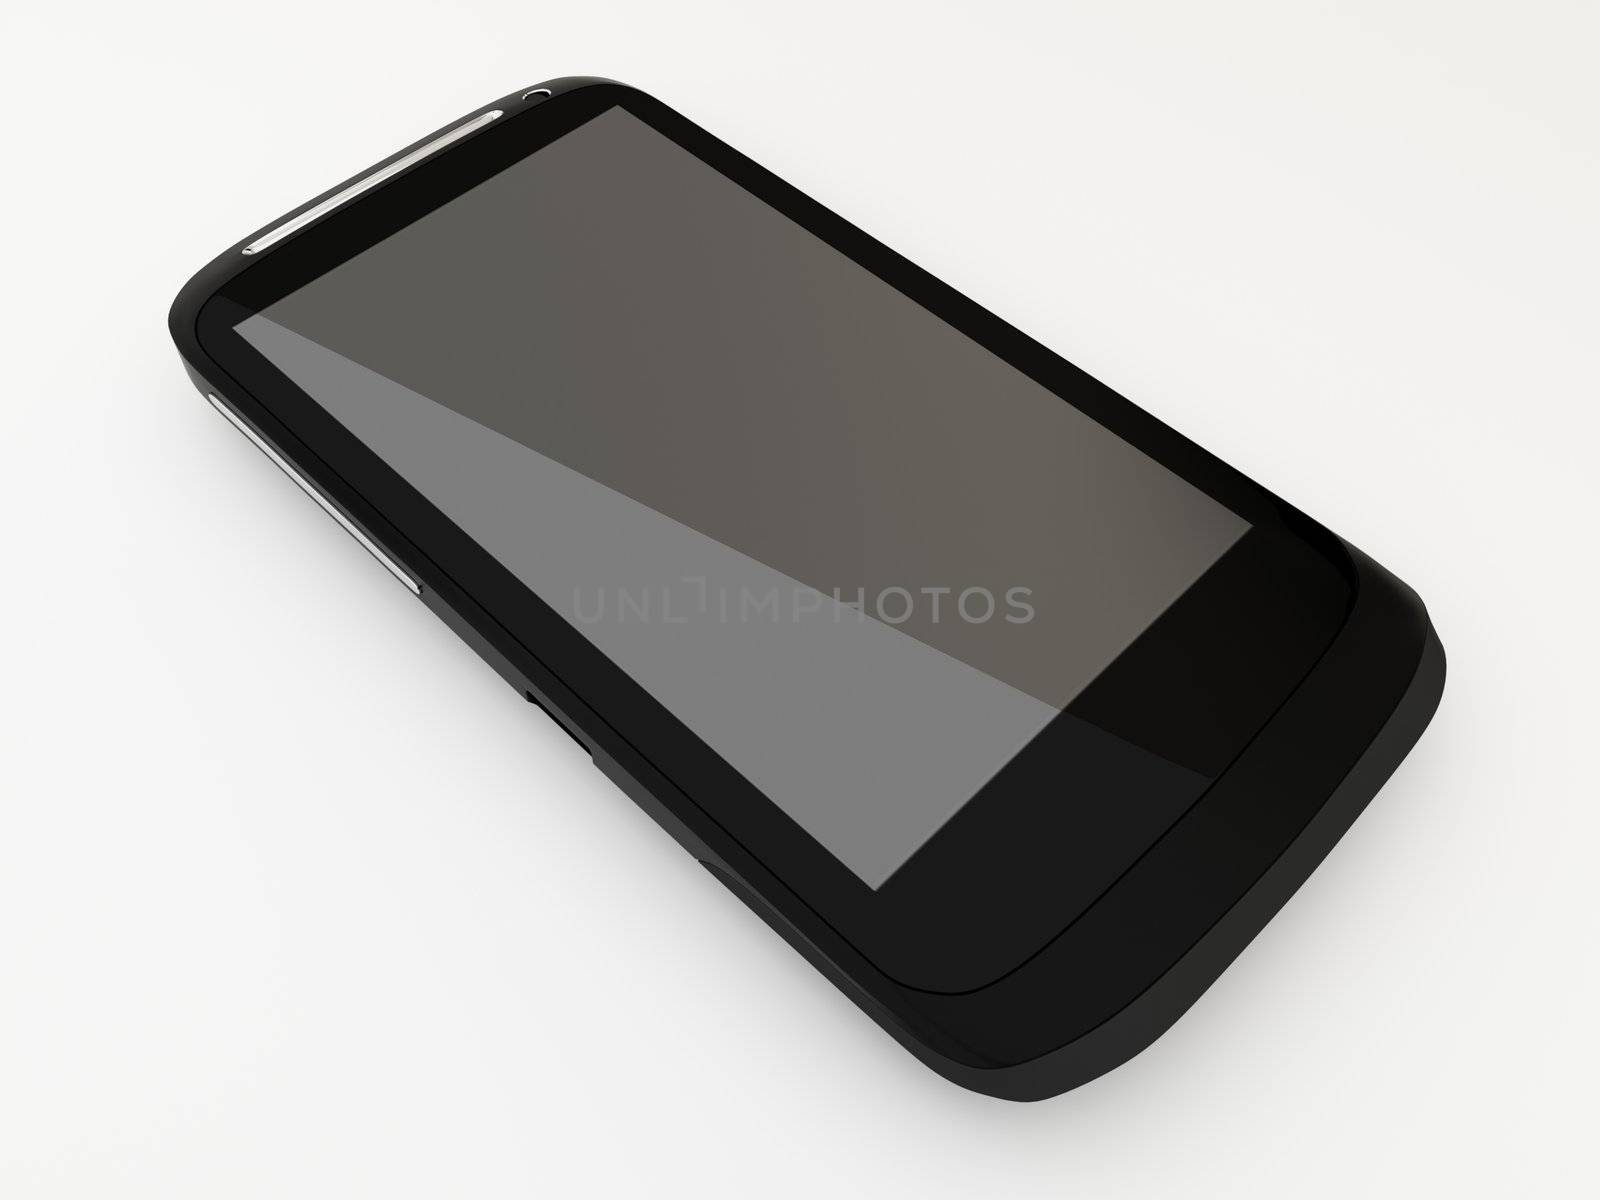 Black smartphone isolated on white background. by Diversphoto